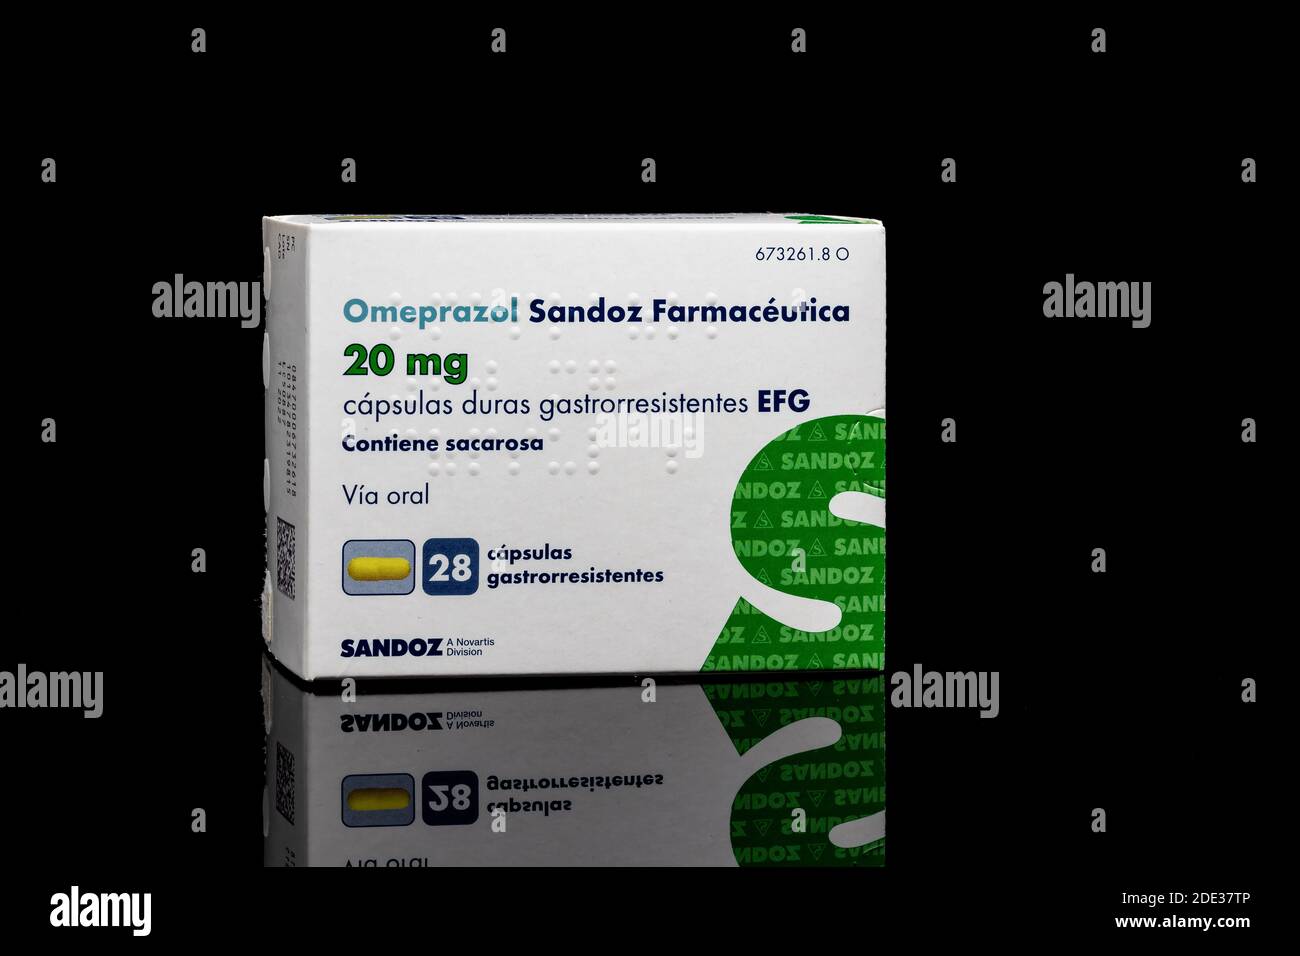 Huelva, Spain - November 26, 2020: Spanish box of Omeprazole brand Sandoz. Omeprazole is used to treat certain stomach and esophagus problems (such as Stock Photo